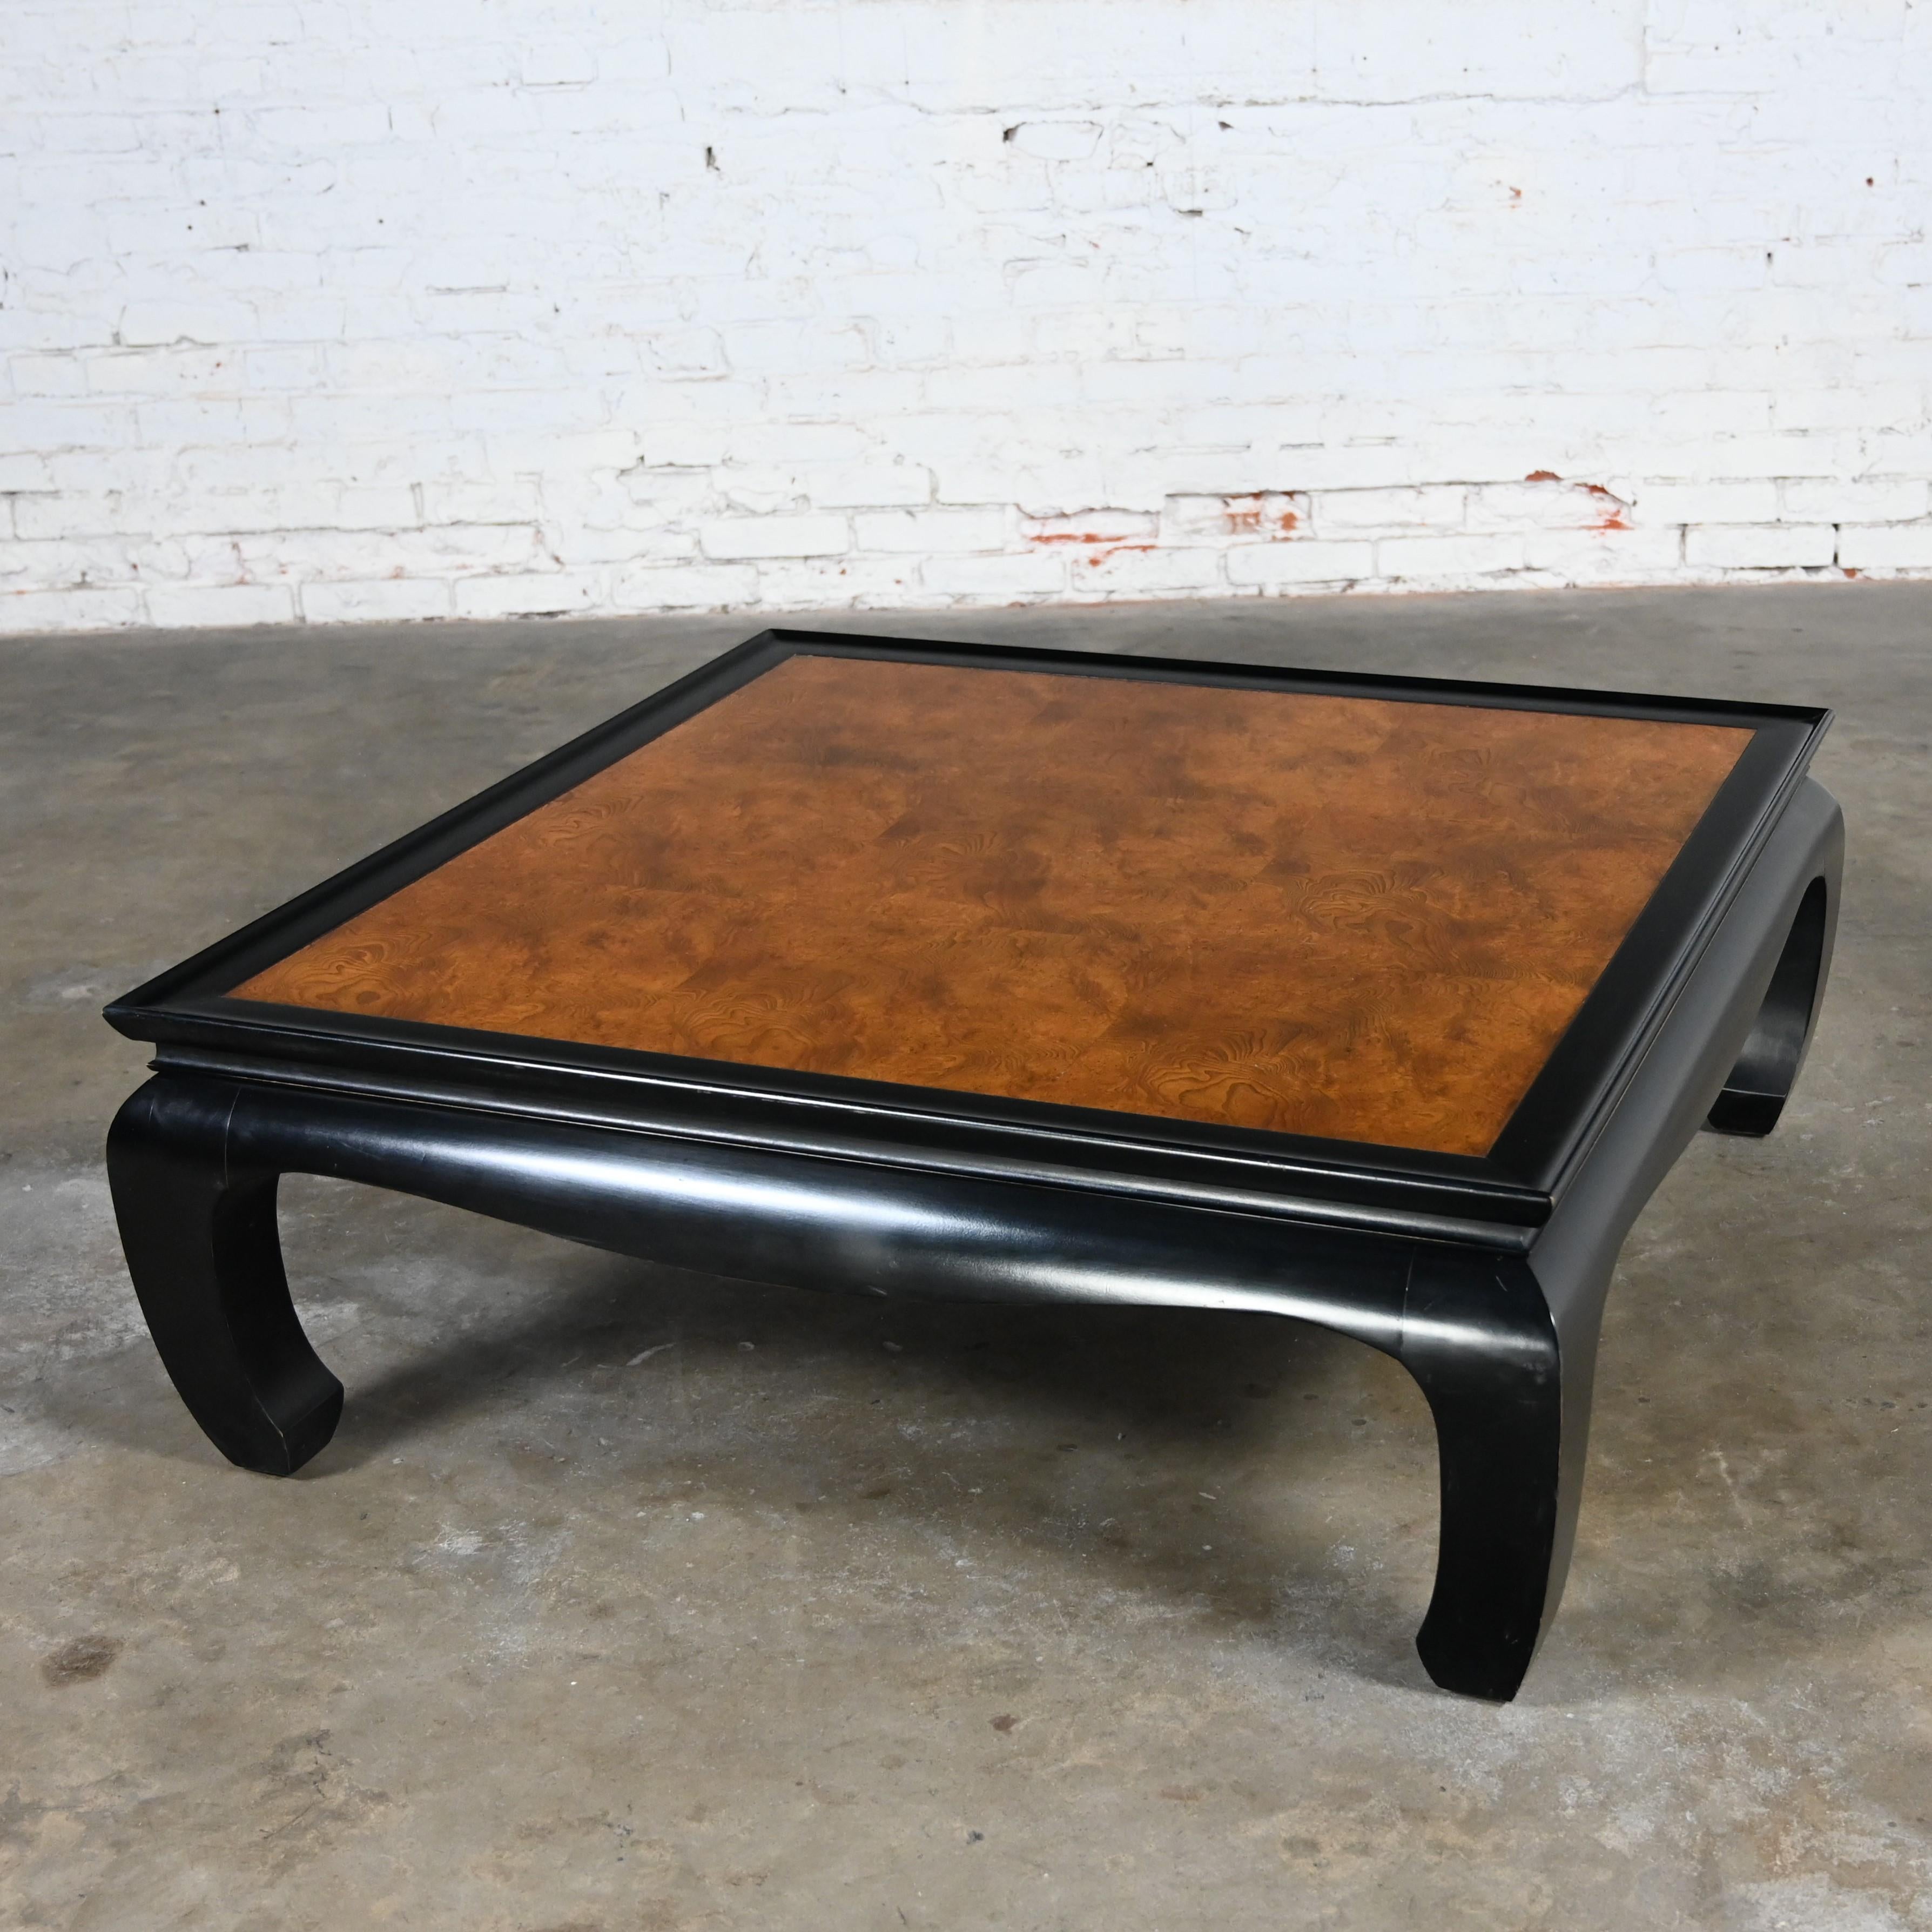 Fabulous vintage Ming Style black & burl coffee table Attributed to Chin Hua Collection by Raymond K. Sabota for Century Furniture. This piece has been attributed based upon archived research including online sources, vintage documentation and